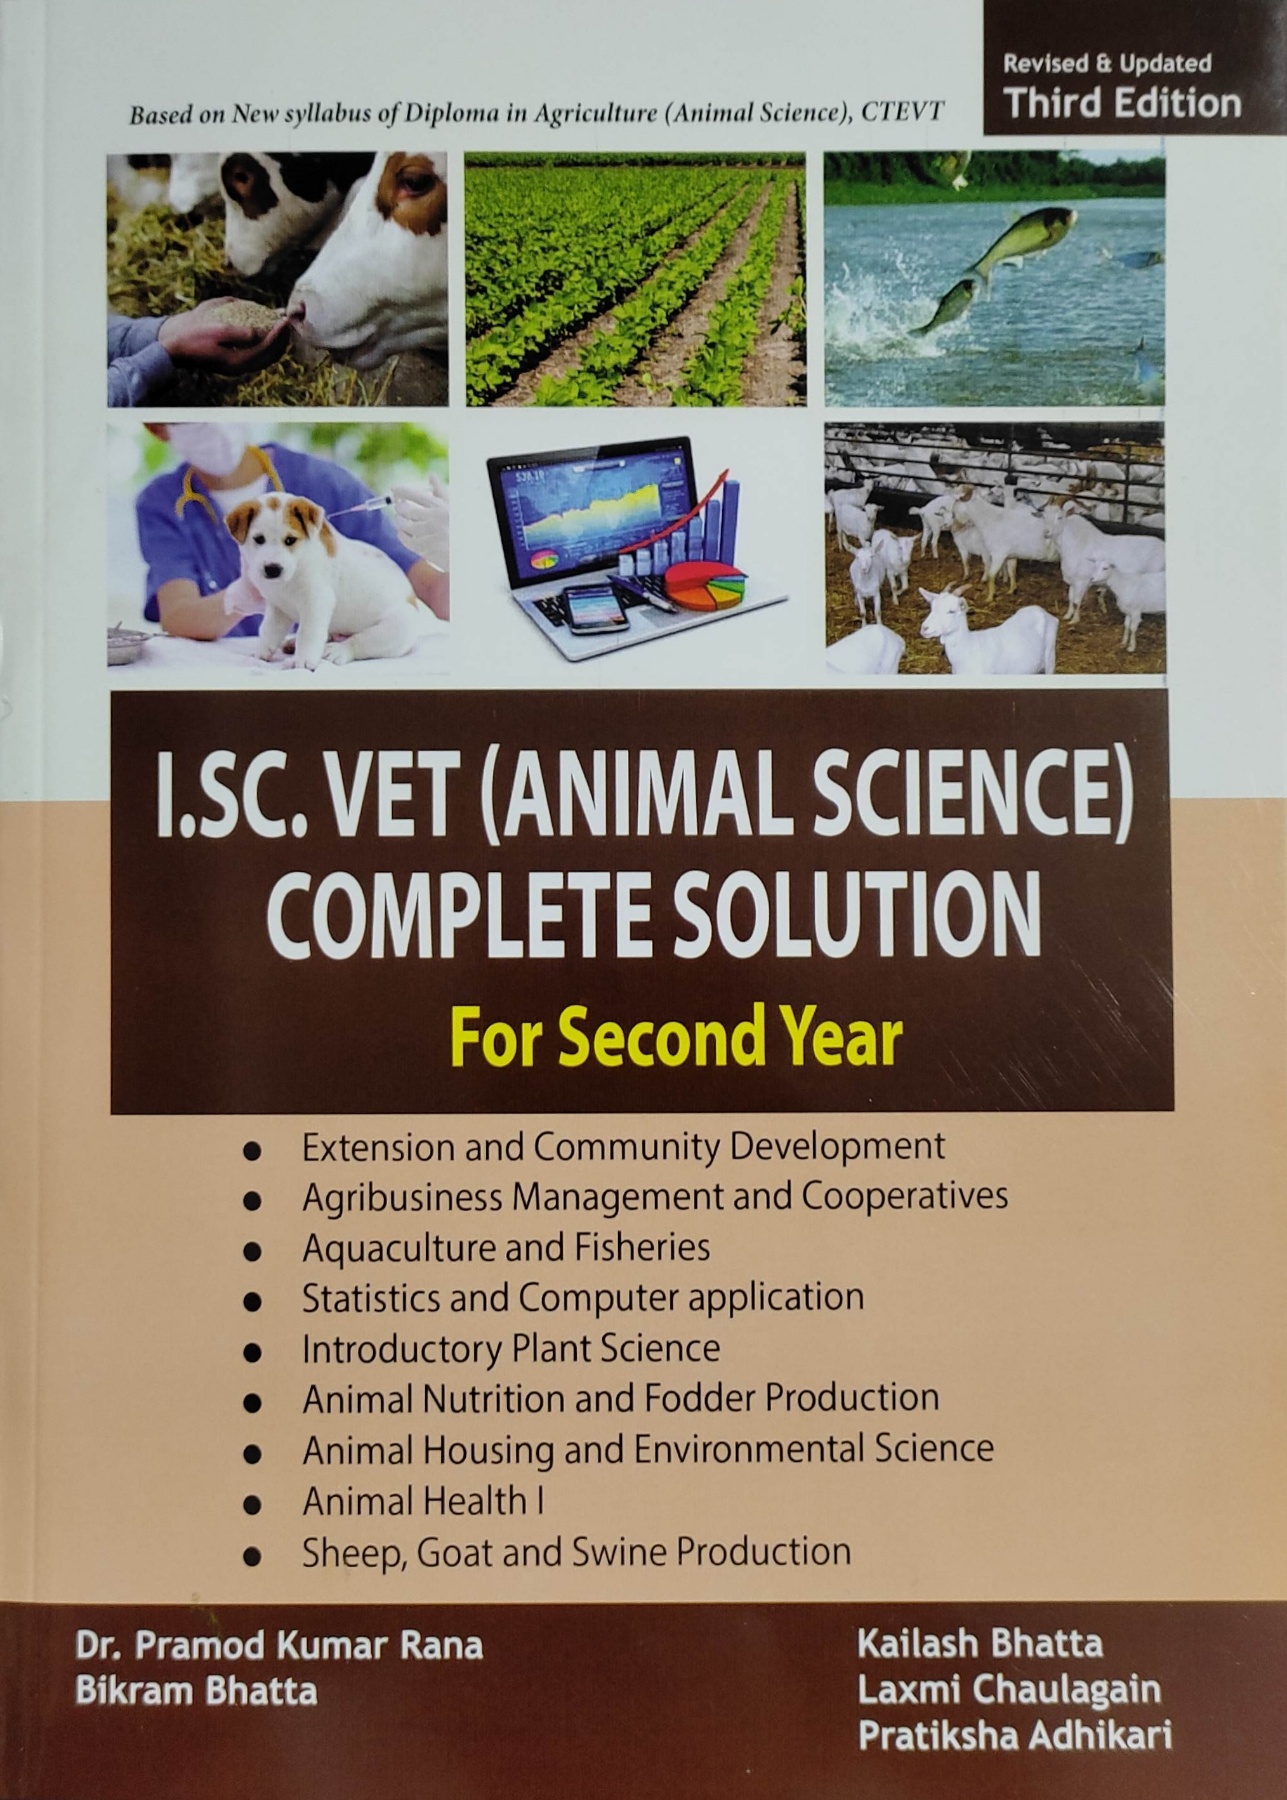 . VET (ANIMAL SCIENCE) COMPLETE SOLUTION For Second Year - Heritage  Publishers & Distributors Pvt. Ltd